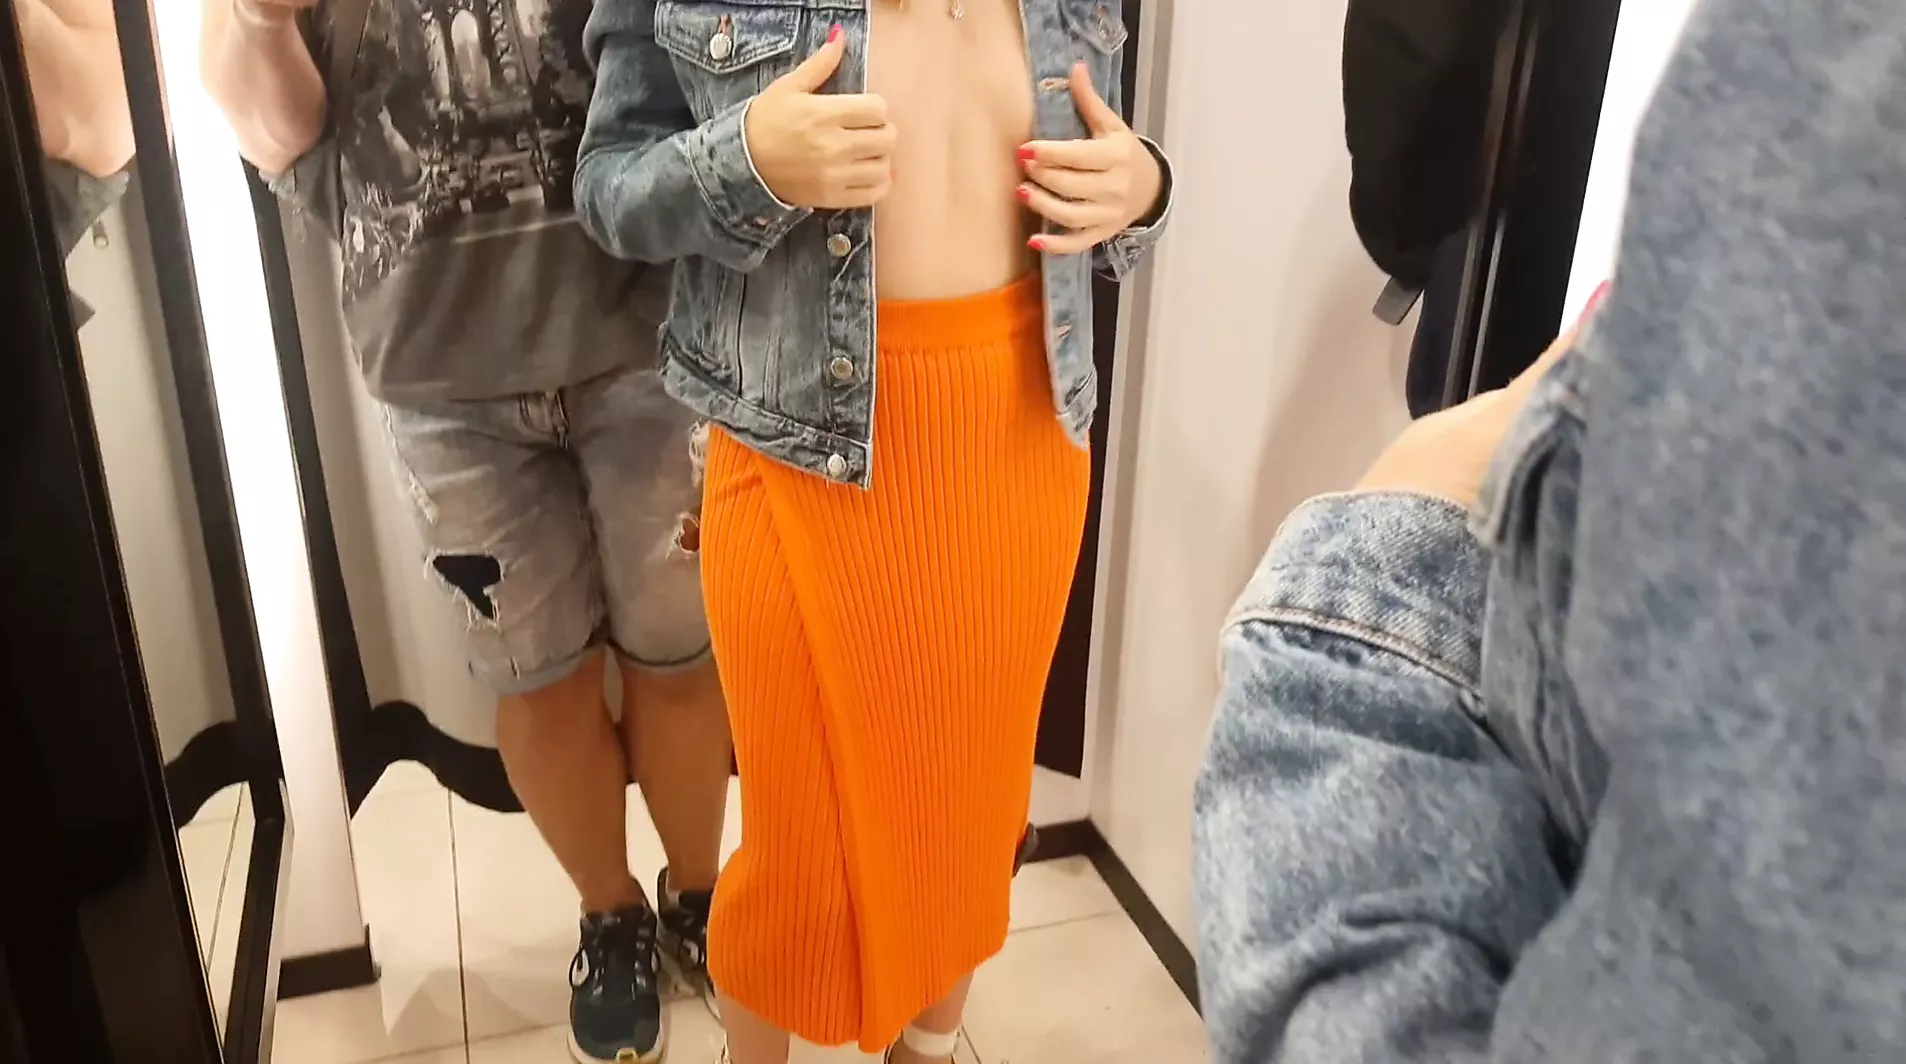 A Sexy Stranger Asked Me to look at her in the fitting Room image pic